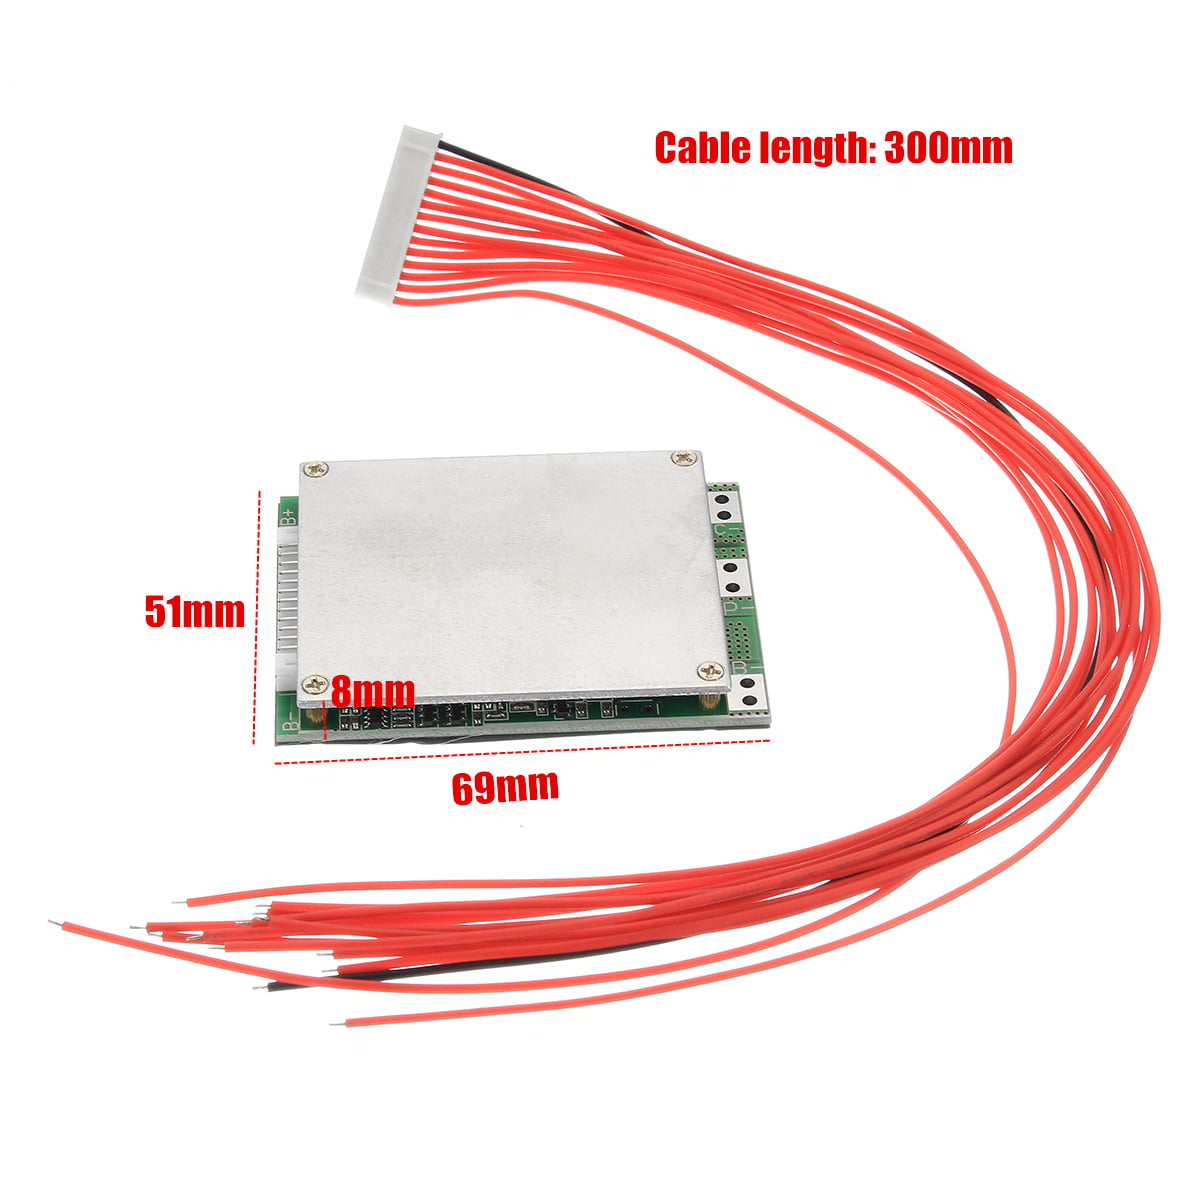 Lithium Battery Charging Board 13S 30A BMS Board Overcharge Overdischarge Short Circuit and Temperature Protection